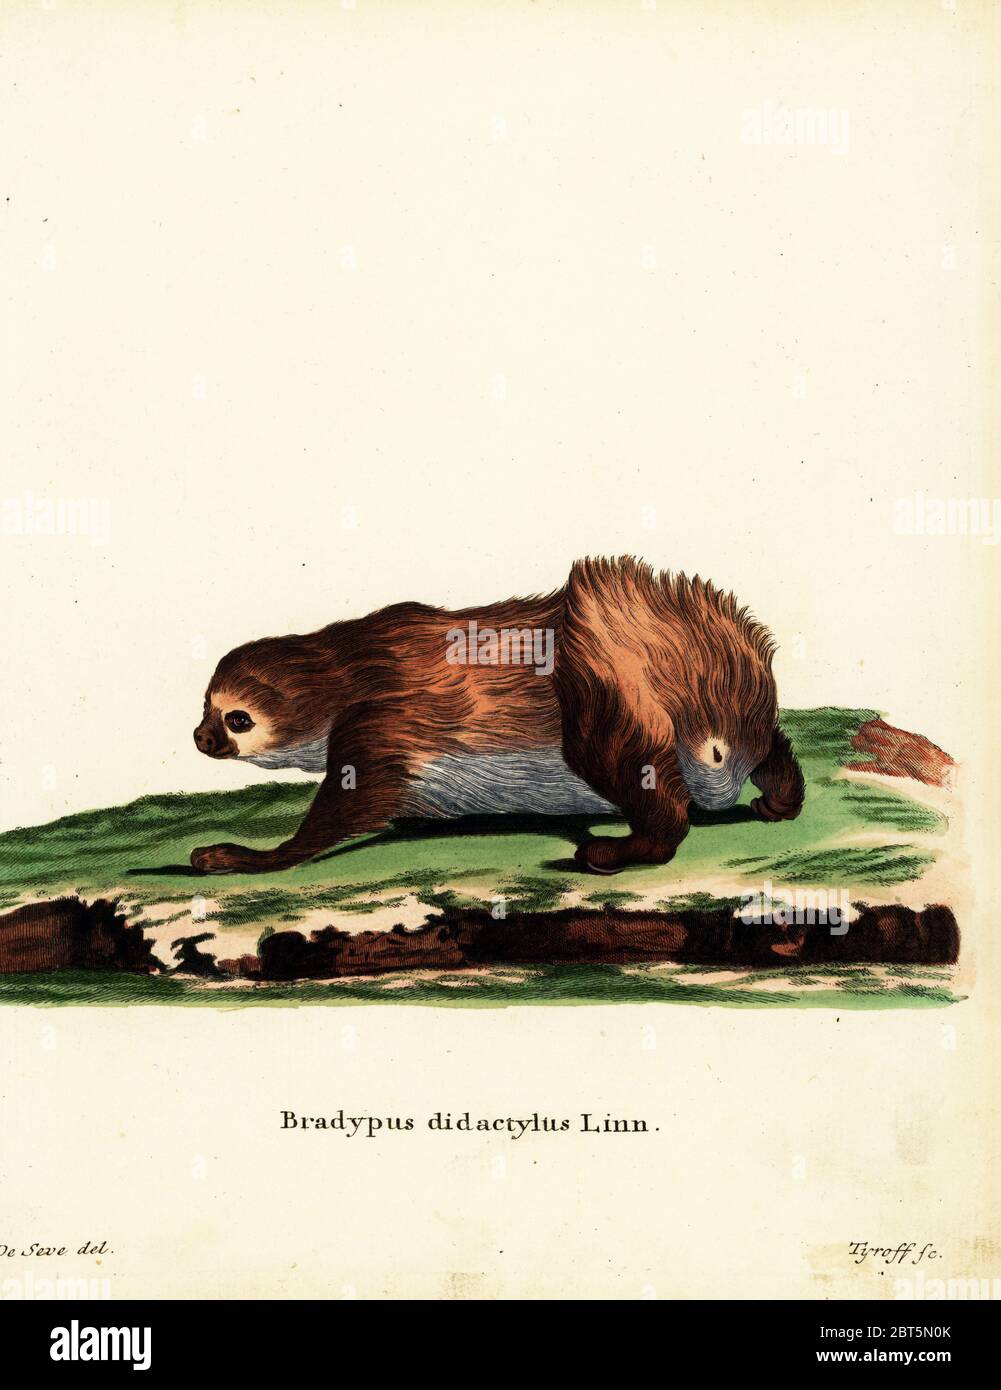 Linnaeus's two-toed sloth, Choloepus didactylus. Bradypus bidactylus Linn. Handcoloured copperplate engraving by Tyroff after an illustration by Jacques de Seve from Johann Christian Daniel Schreber's Animal Illustrations after Nature, or Schreber's Fantastic Animals, Erlangen, Germany, 1775. Stock Photo